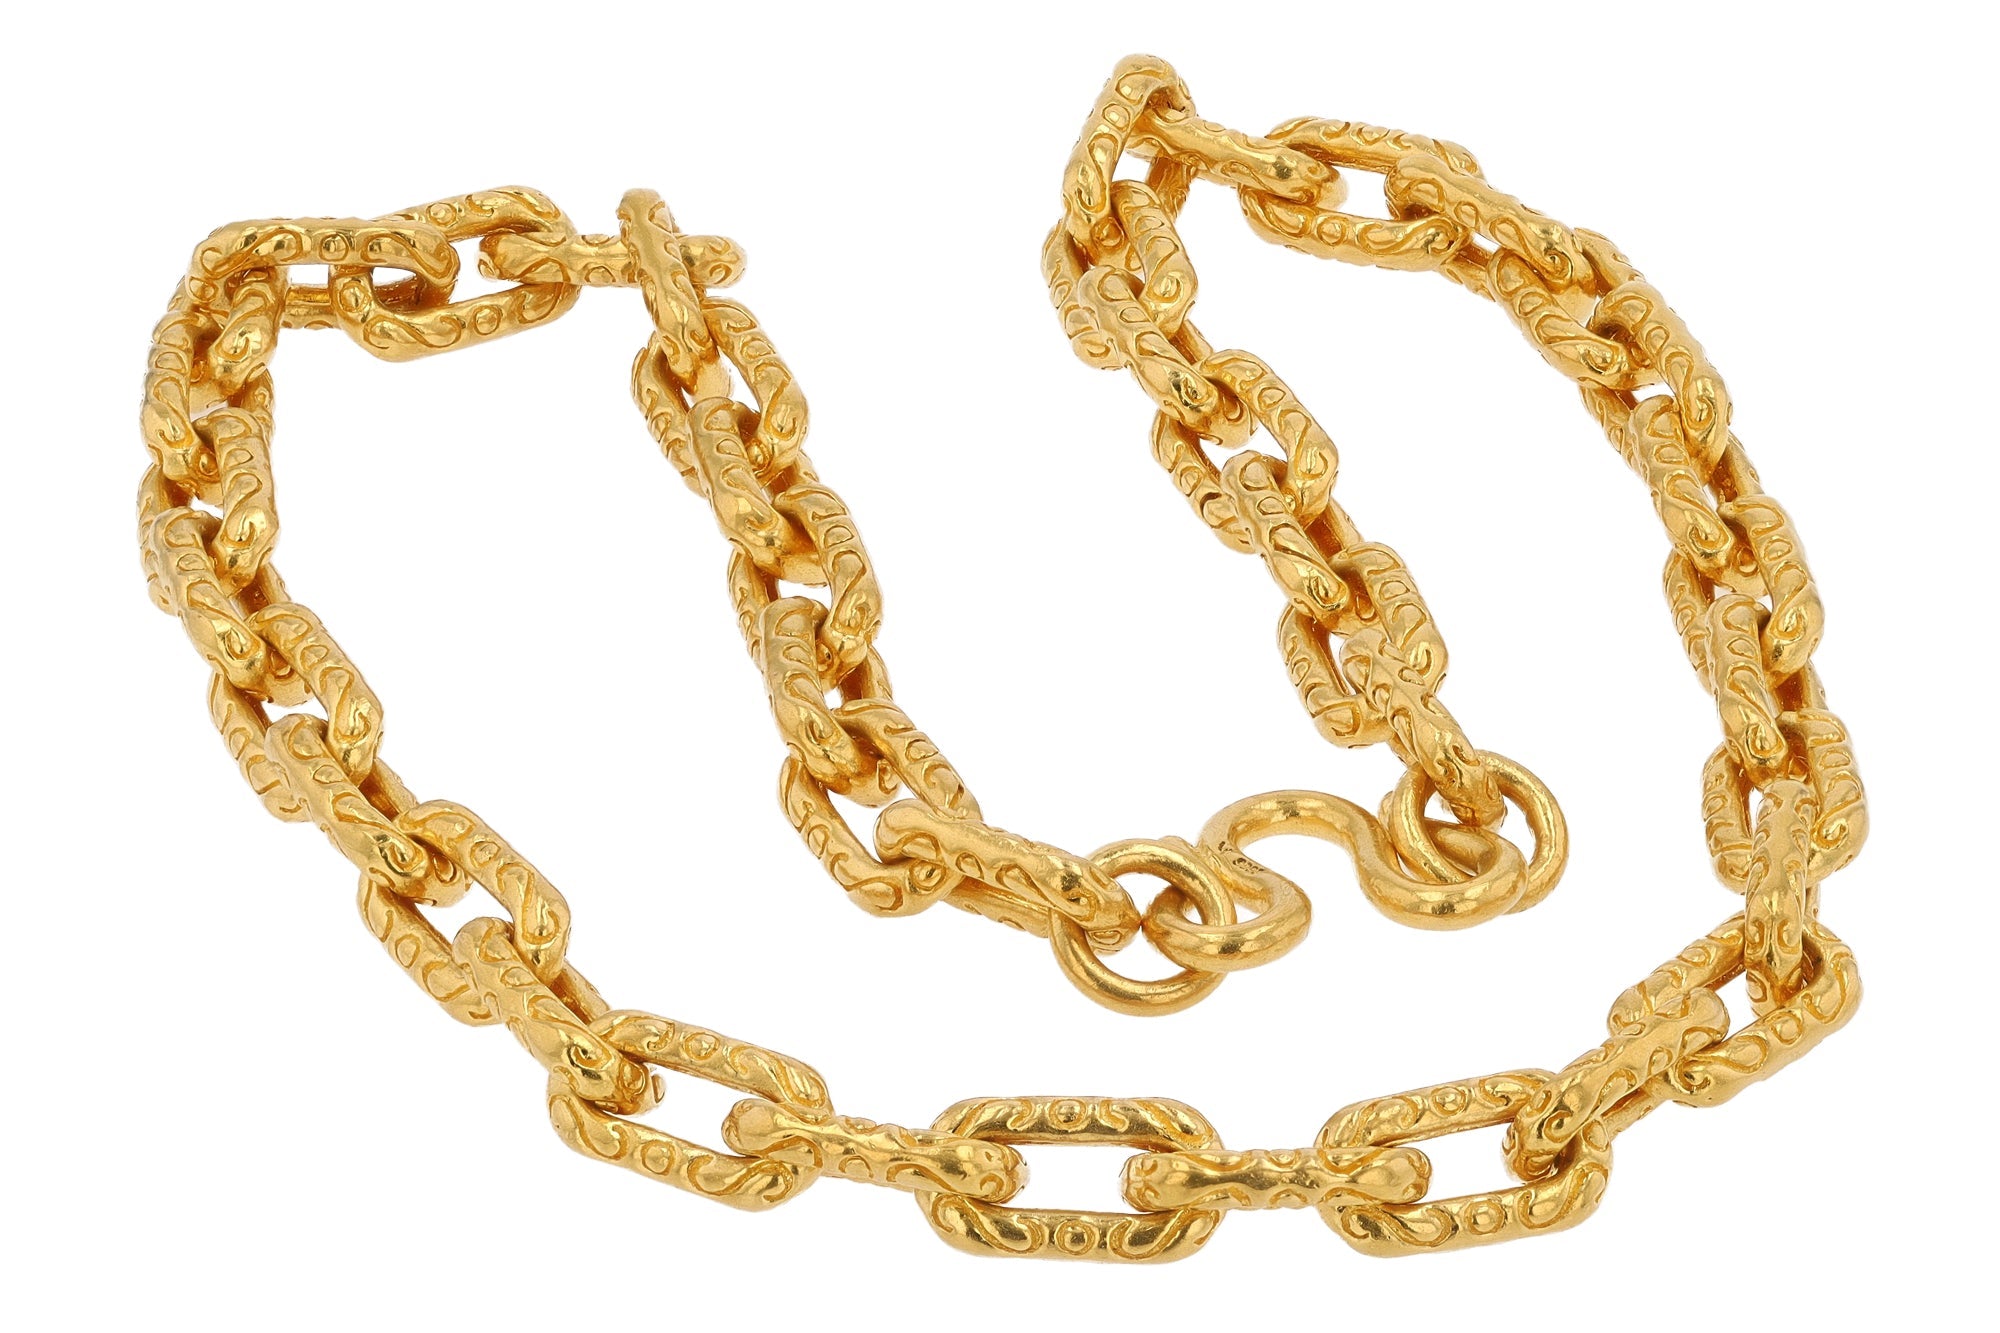 Heavy 24K Gold Engraved Chain Link Necklace